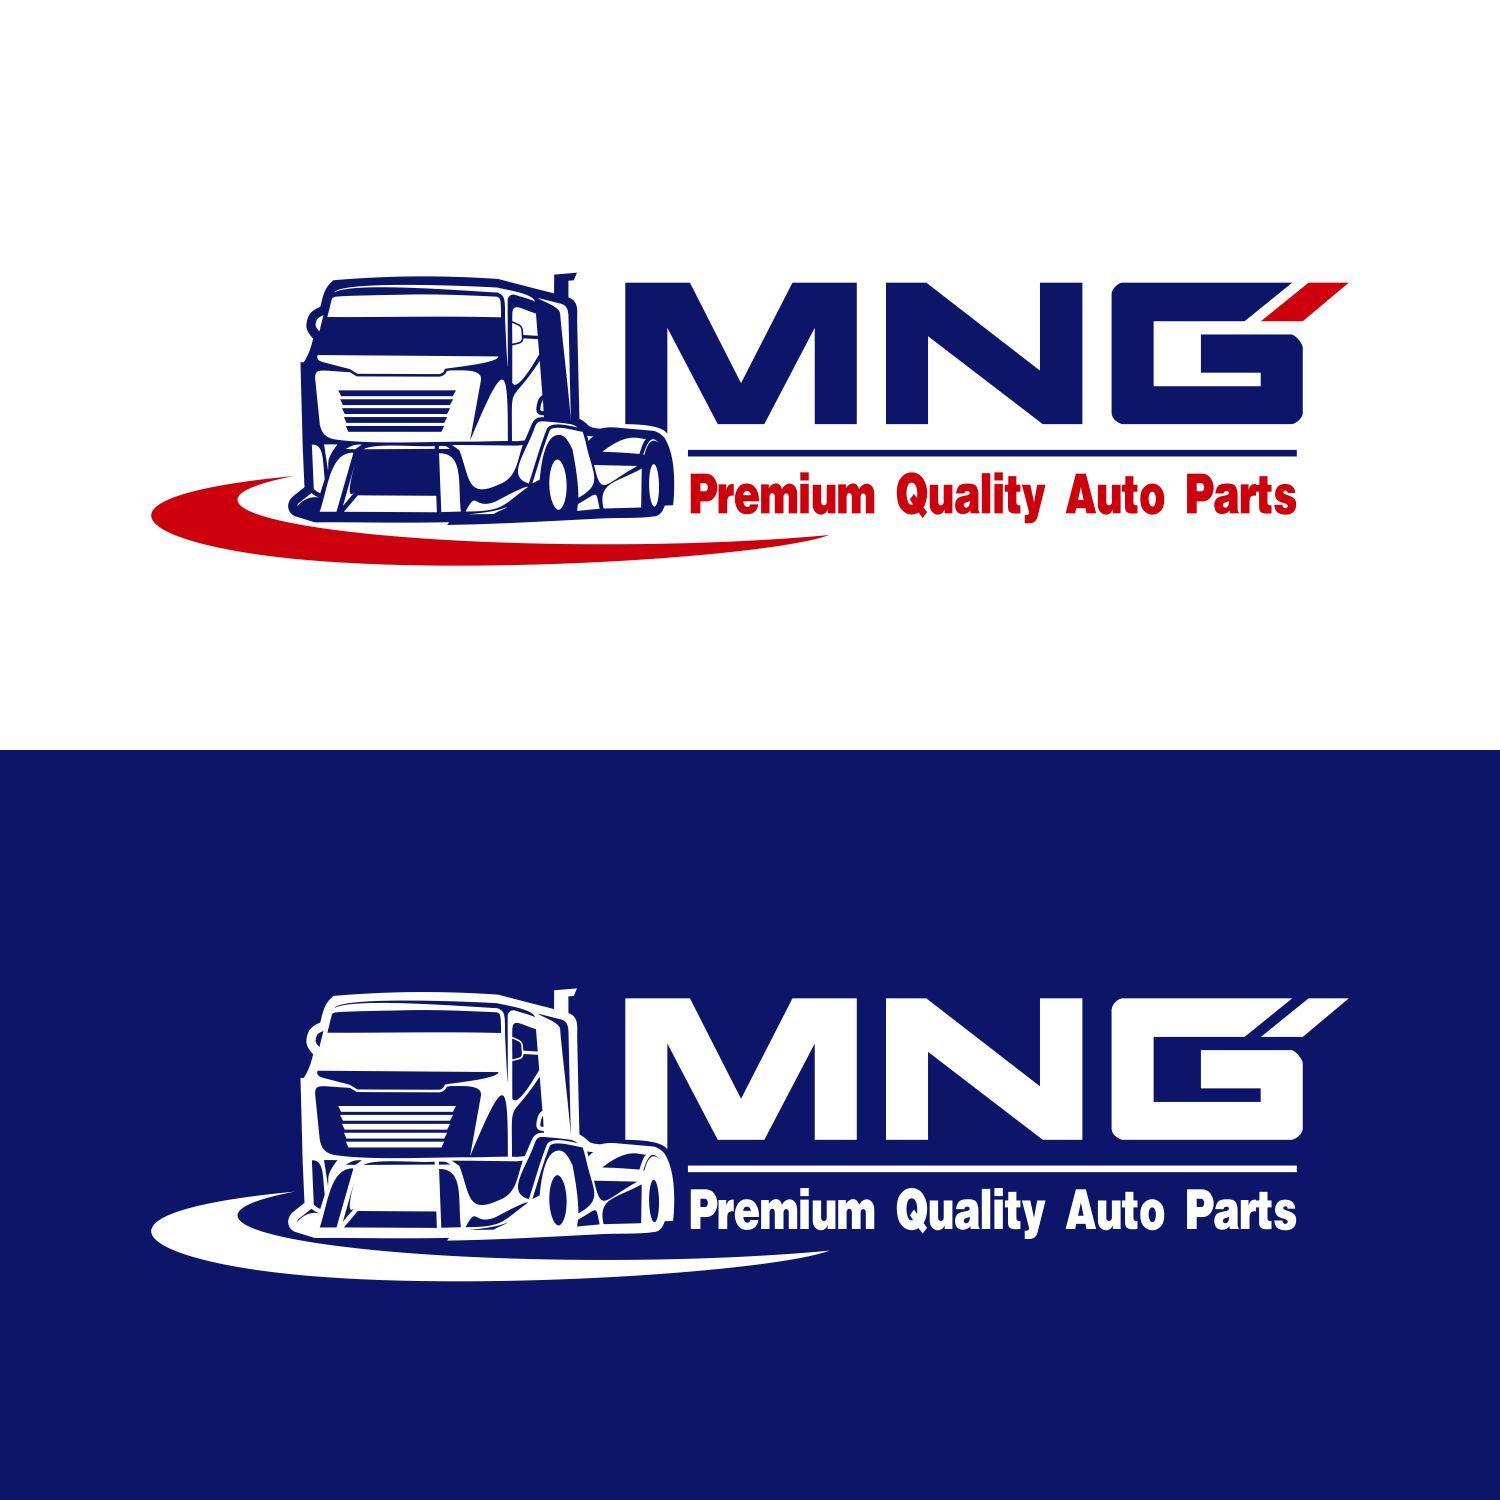 Truck and Auto Parts Logo - 90 Professional Logo Designs | Automotive Logo Design Project for a ...